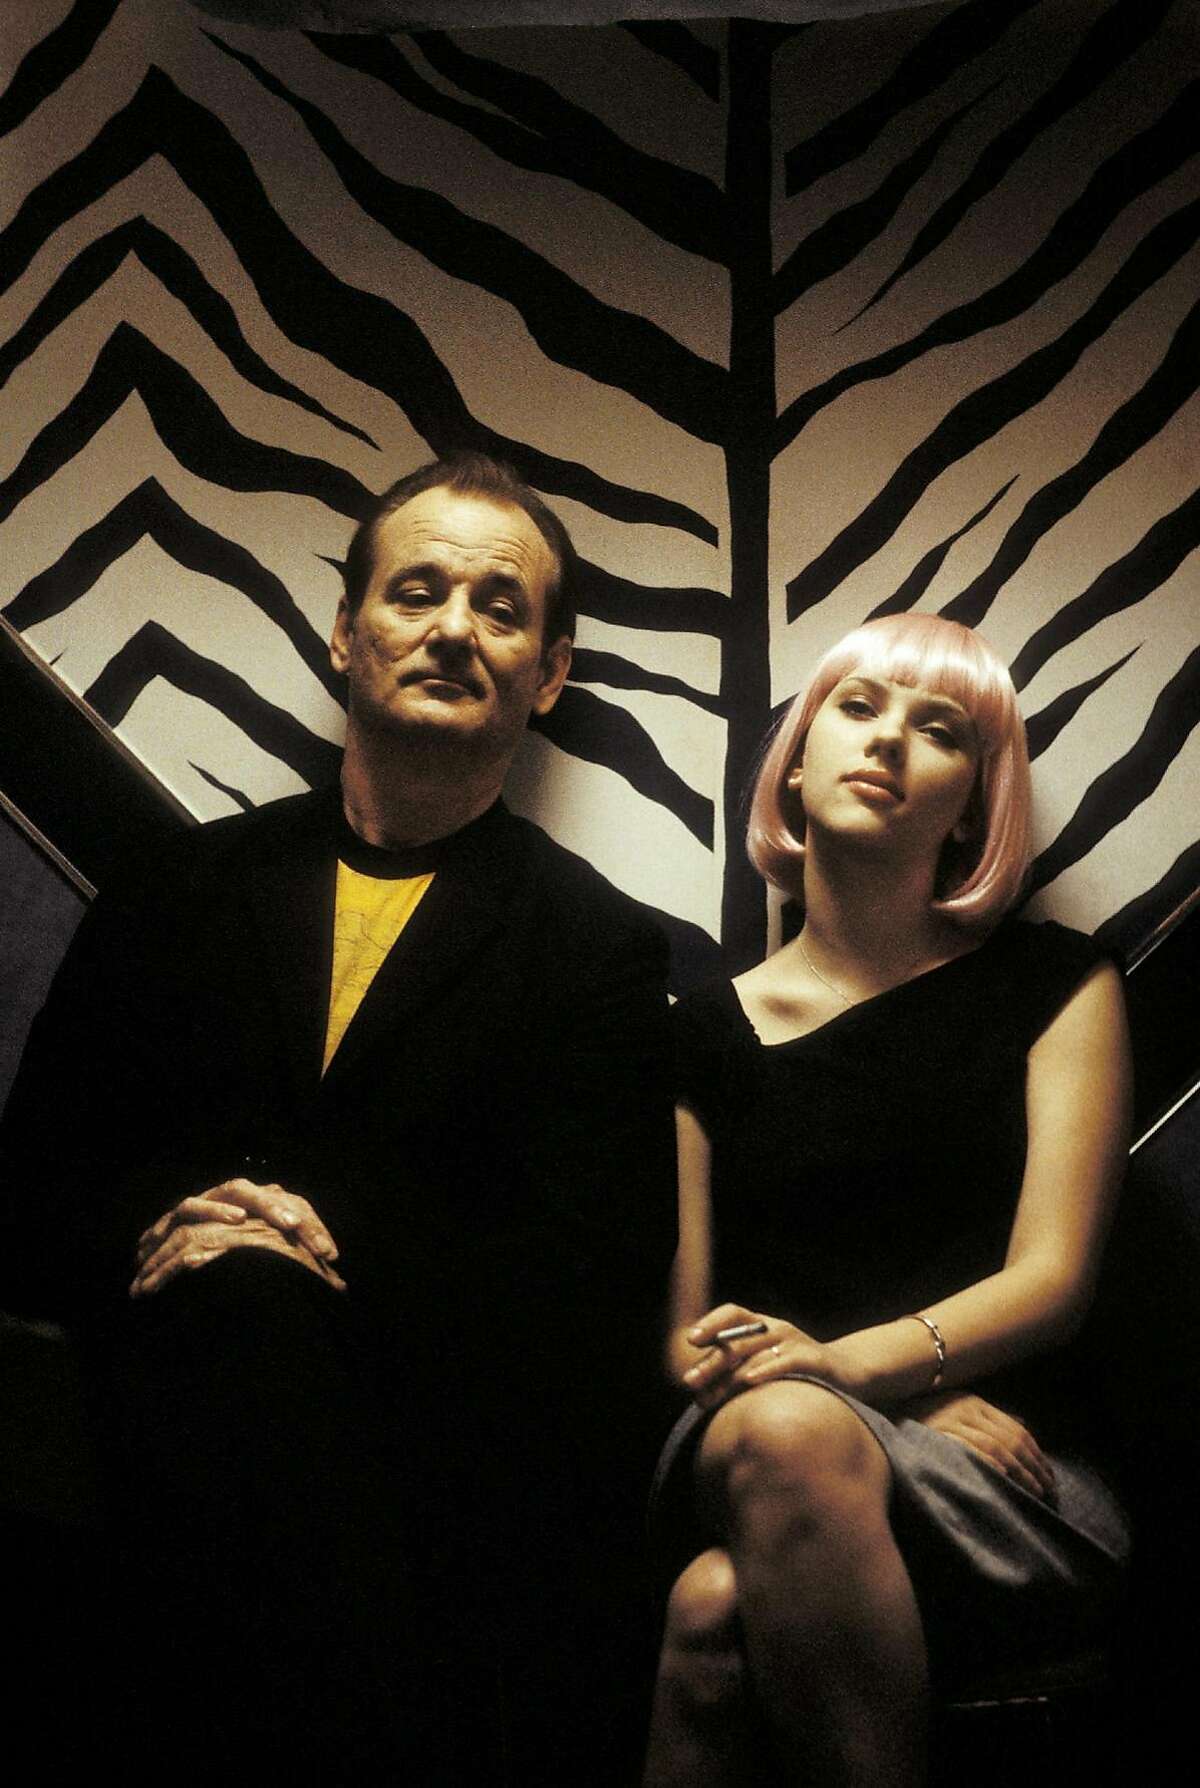 LOST12-1812 For LOST12, Datebook ; Bill Murray (left) and Scarlett Johansson (right) star in Sofia Coppola�s LOST IN TRANSLATION, a Focus Features release. Photo Credit: Yoshio Sato ; 2003 Focus Features. All Rights Reserved ; on 7/17/03 in . also ran 01/25/2004, 03/28/2004 Yoshio Sato / Focus Features Renee Zellweger (left) and Nicole Kidman worked together in the Civil War movie Cold Mountain. Director Peter Jackson (second from right) celebrates his Golden Globe win for The Lord of the Rings: The Return of the King with (from left) producer Barrie Osborne, and actors Dominic Monaghan, John Rhys-Davies and Elijah Wood. Jackson should win the Oscar. Buster Keaton: not smiling, still funny.